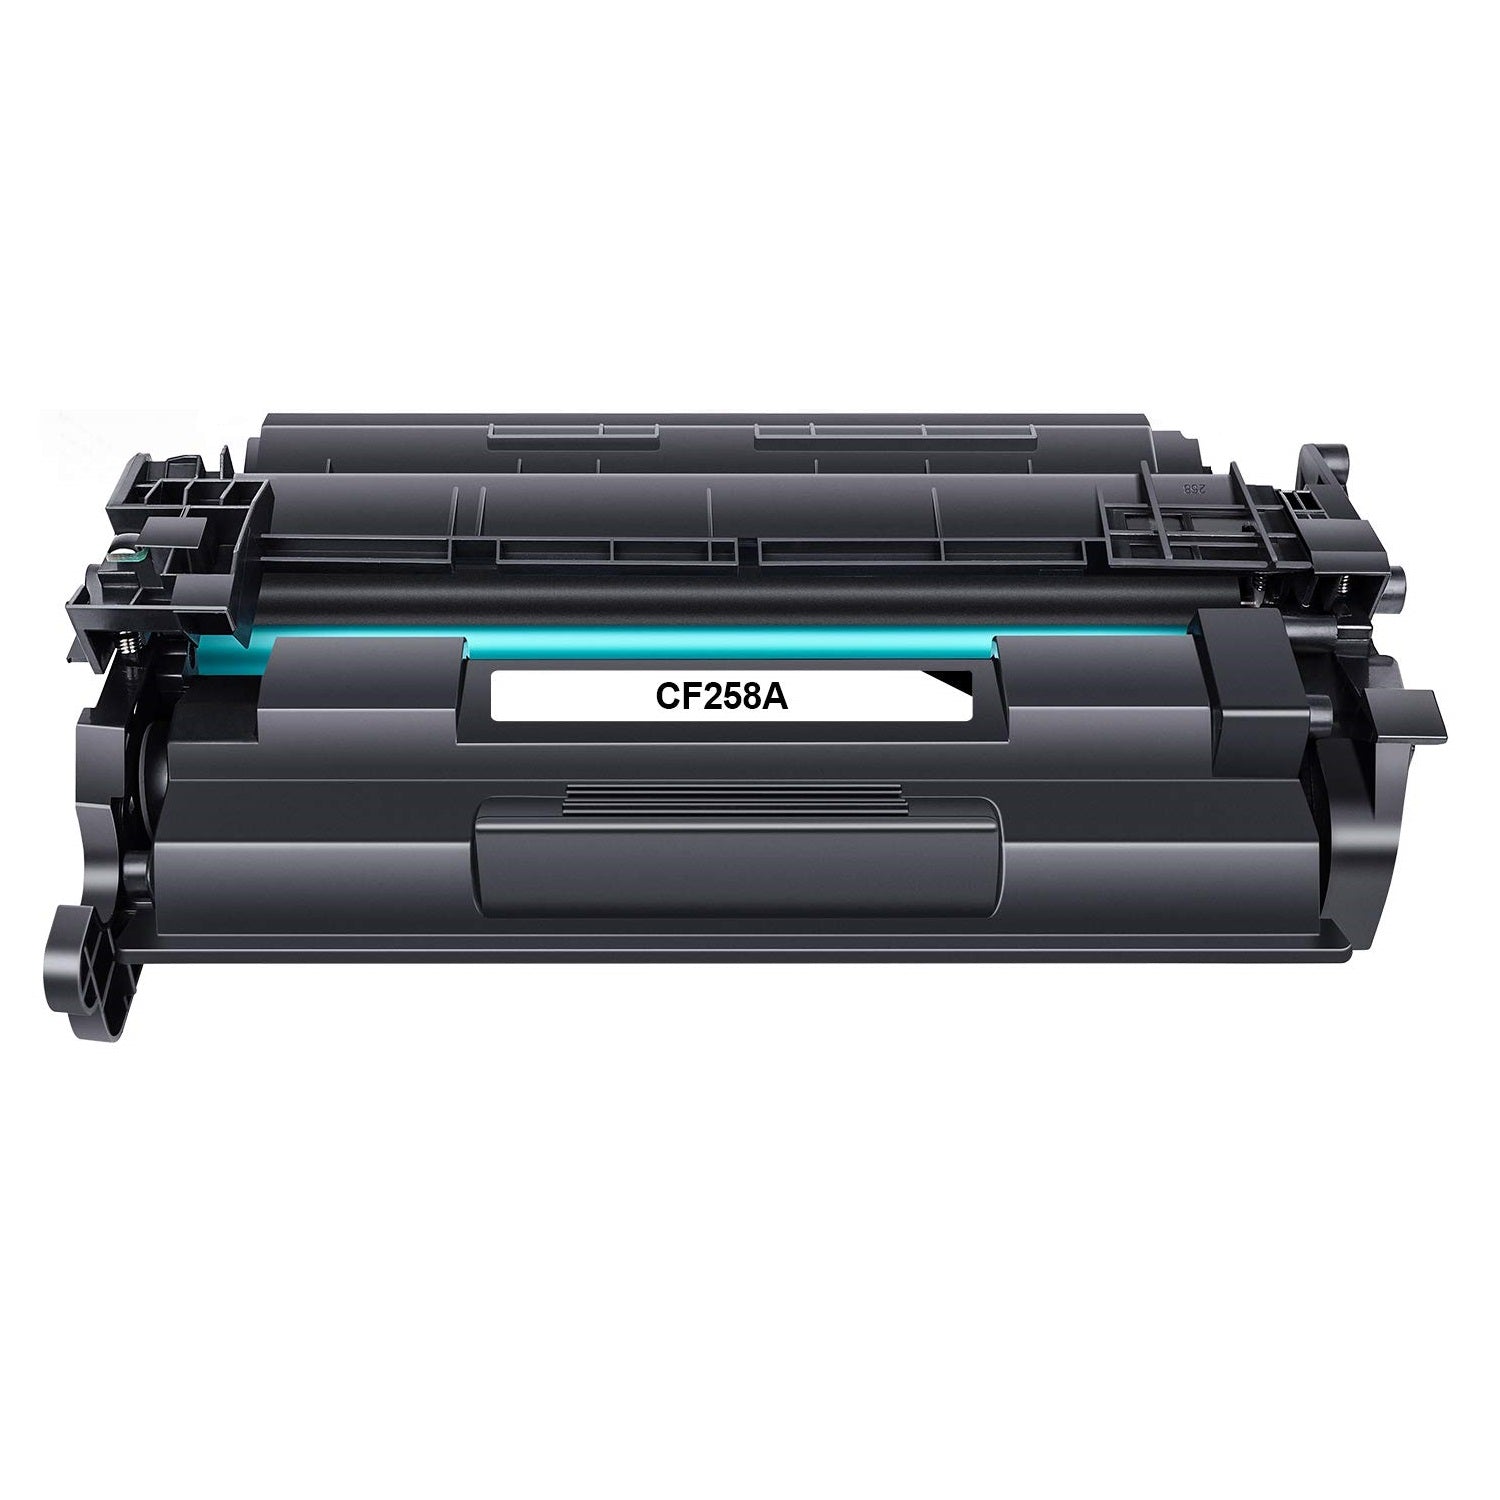 Absolute Toner AbsoluteToner Toner Laser Cartridge Compatible With HP 58A CF258A (With Chip) Black High Yield HP Toner Cartridges